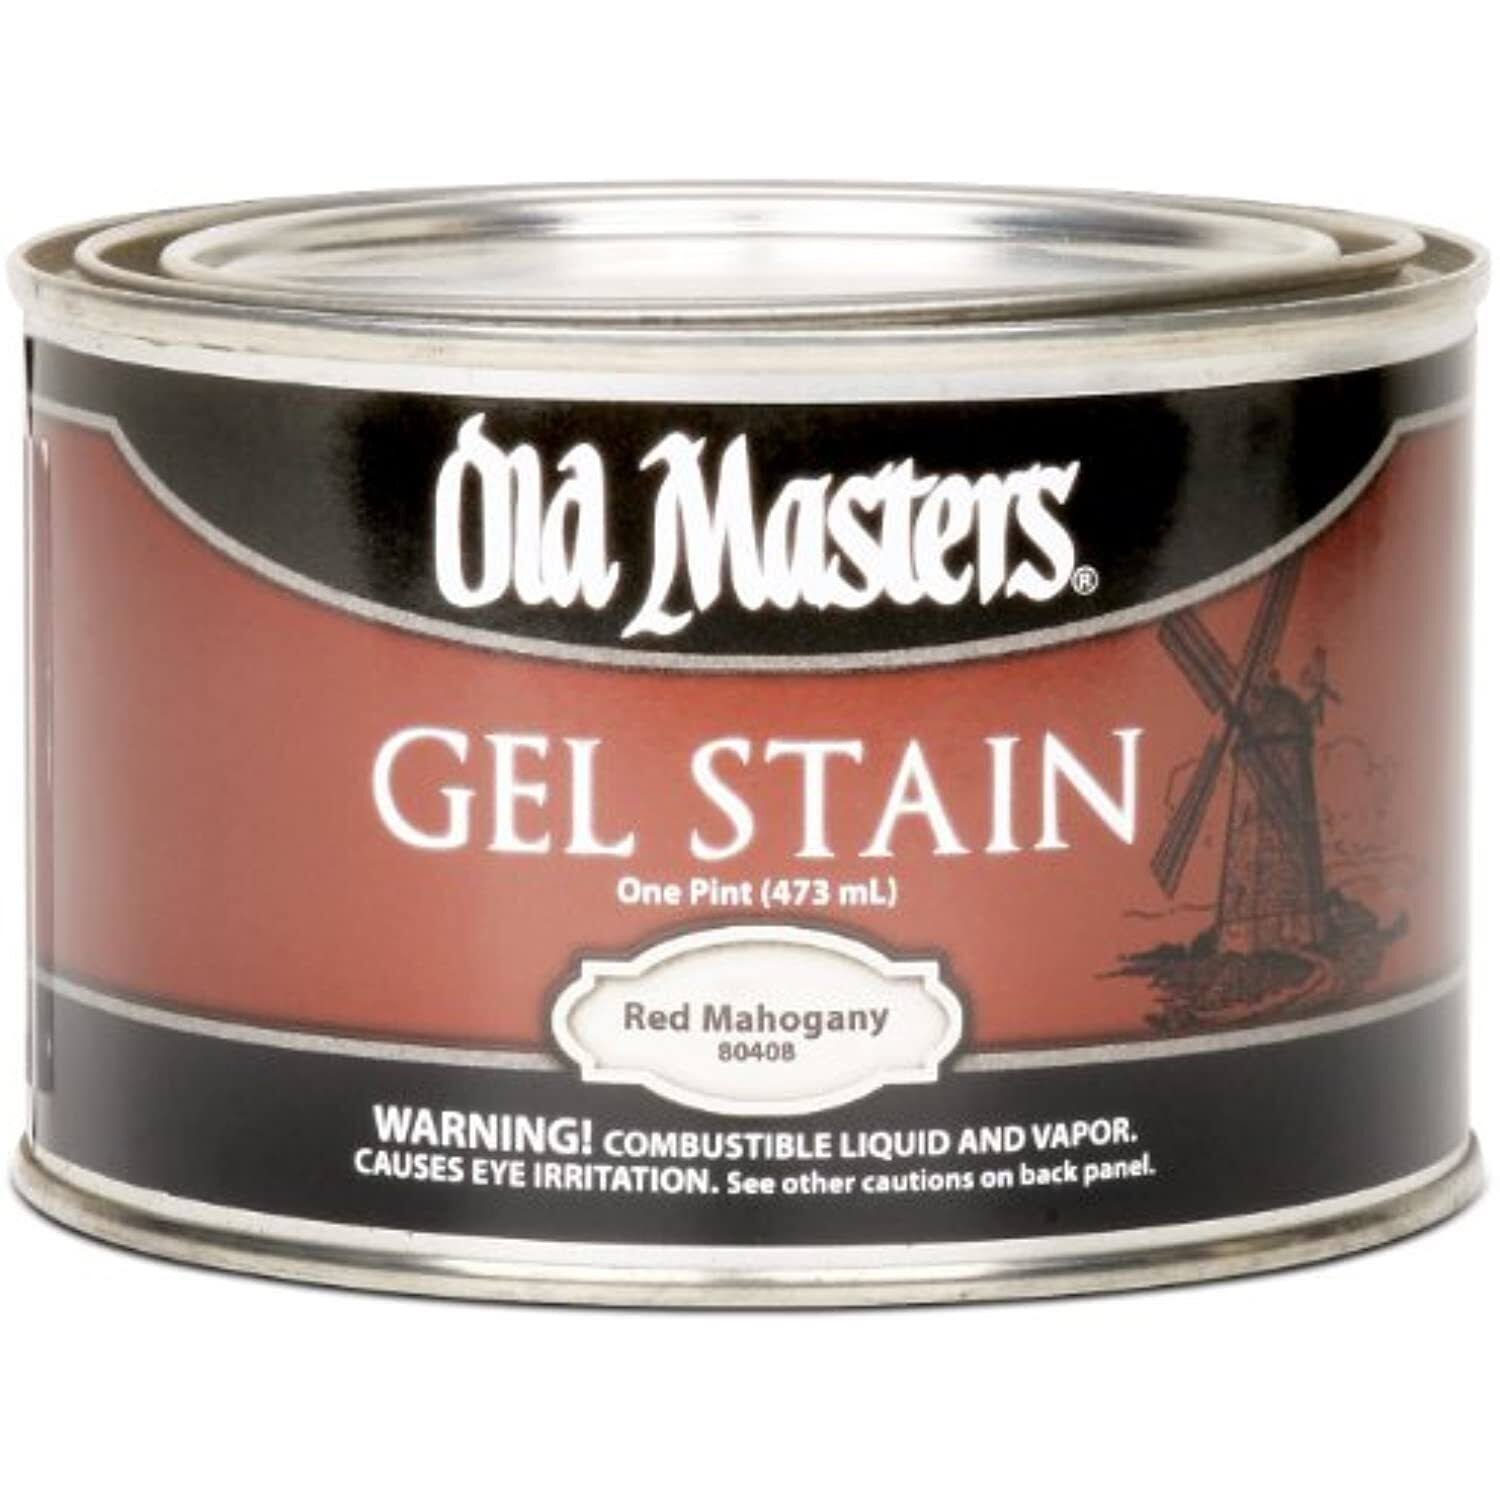 Old Masters Gel Stain - Mahogany, 1 Pint